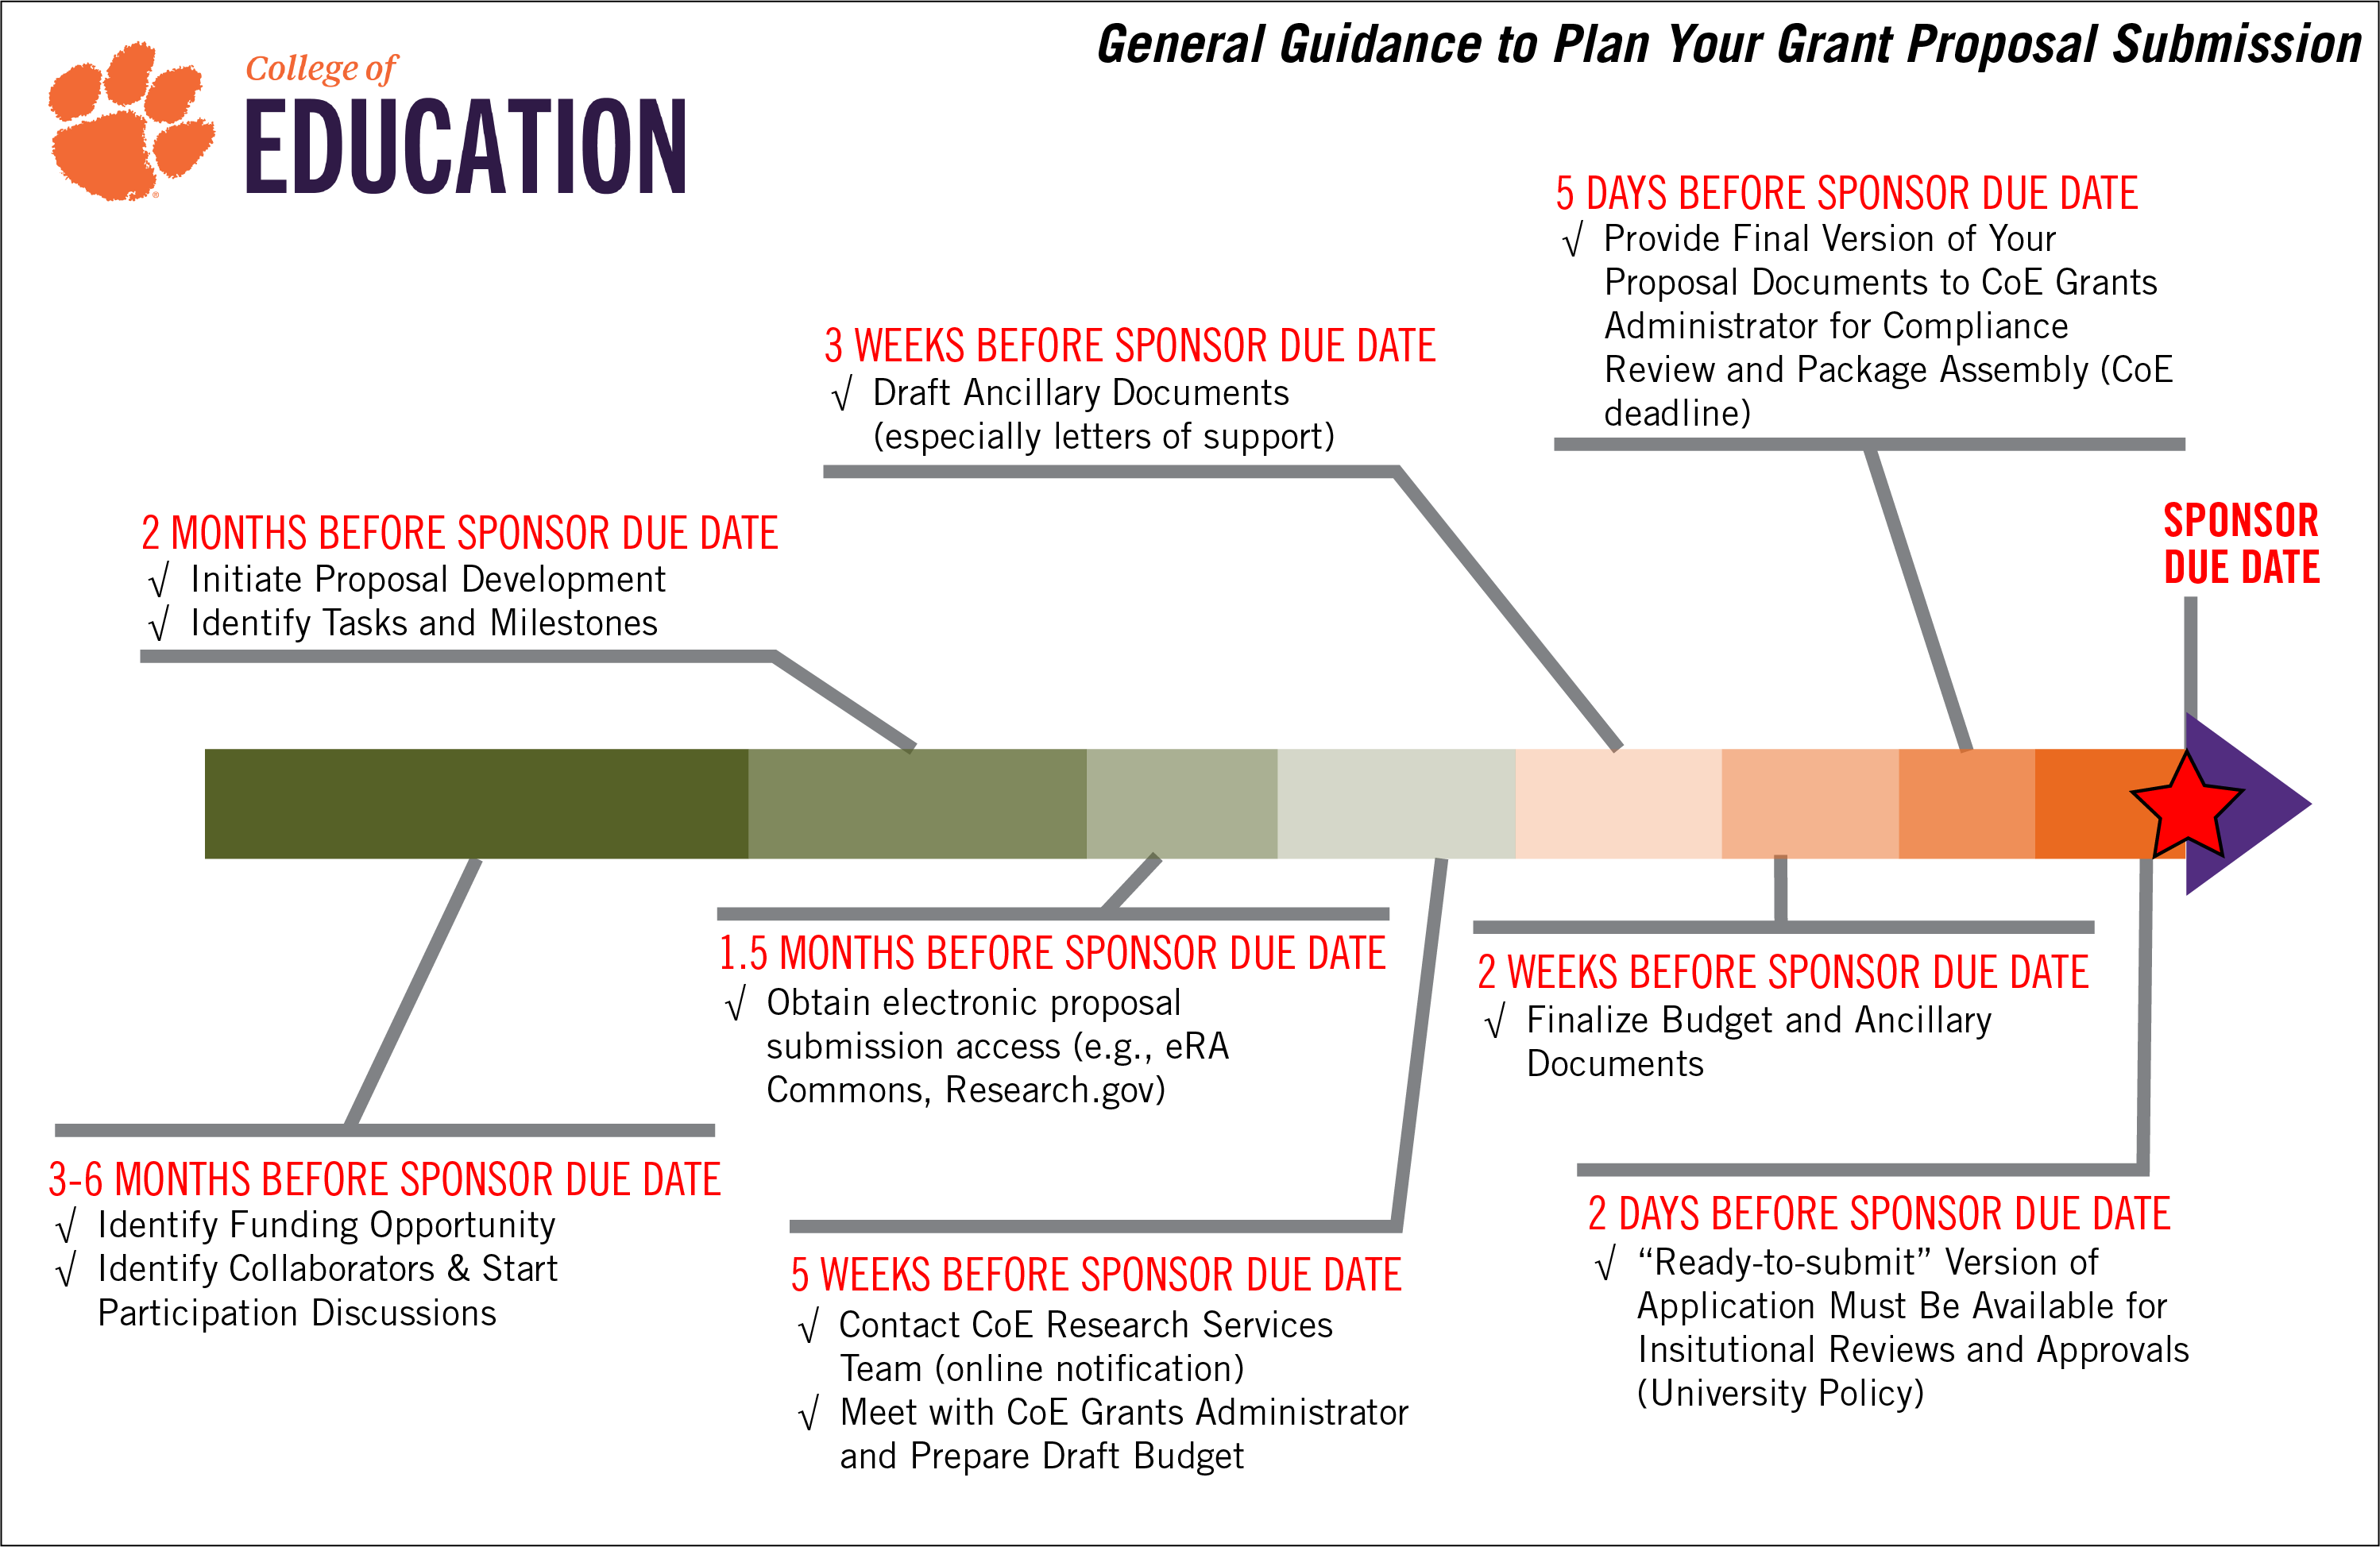 This graphic is a timeline arrow that illustrates generally recommended steps in planning your grant propoosal submission. THREE TO SIX MONTHS BEFORE THE SPONSOR DUE DATE, identify the funding opportunity, identify collaborators and start participation discussions. TWO MONTHS BEFORE THE SPONSOR DUE DATE, initiate proposal development and identify tasks and milestones. ONE AND A HALF MONTHS BEFORE THE SPONSOR DUE DATE, obtain electronic proposal submission access (e.g., eRA Commons, Research.gov). FIVE WEEKS BEFORE THE SPONSOR DUE DATE, contact the CoE Research Services team (online notification) and meet with the CoE Grants Administrator to prepare a draft budget. THREE WEEKS BEFORE THE SPONSOR DUE DATE, draft ancillary documents (especially letters of support). TWO WEEKS BEFORE THE SPONSOR DUE DATE, finalize the budget and ancillary documents. FIVE DAYS BEFORE THE SPONSOR DUE DATE, provide the final version of your proposal documents to the CoE Grants Administrator for compliance review and package assembly (CoE deadline). TWO DAYS BEFORE THE SPONSOR DUE DATE, the "ready-to-submit" version of the application must be available for institutional reviews and approvals (university policy).